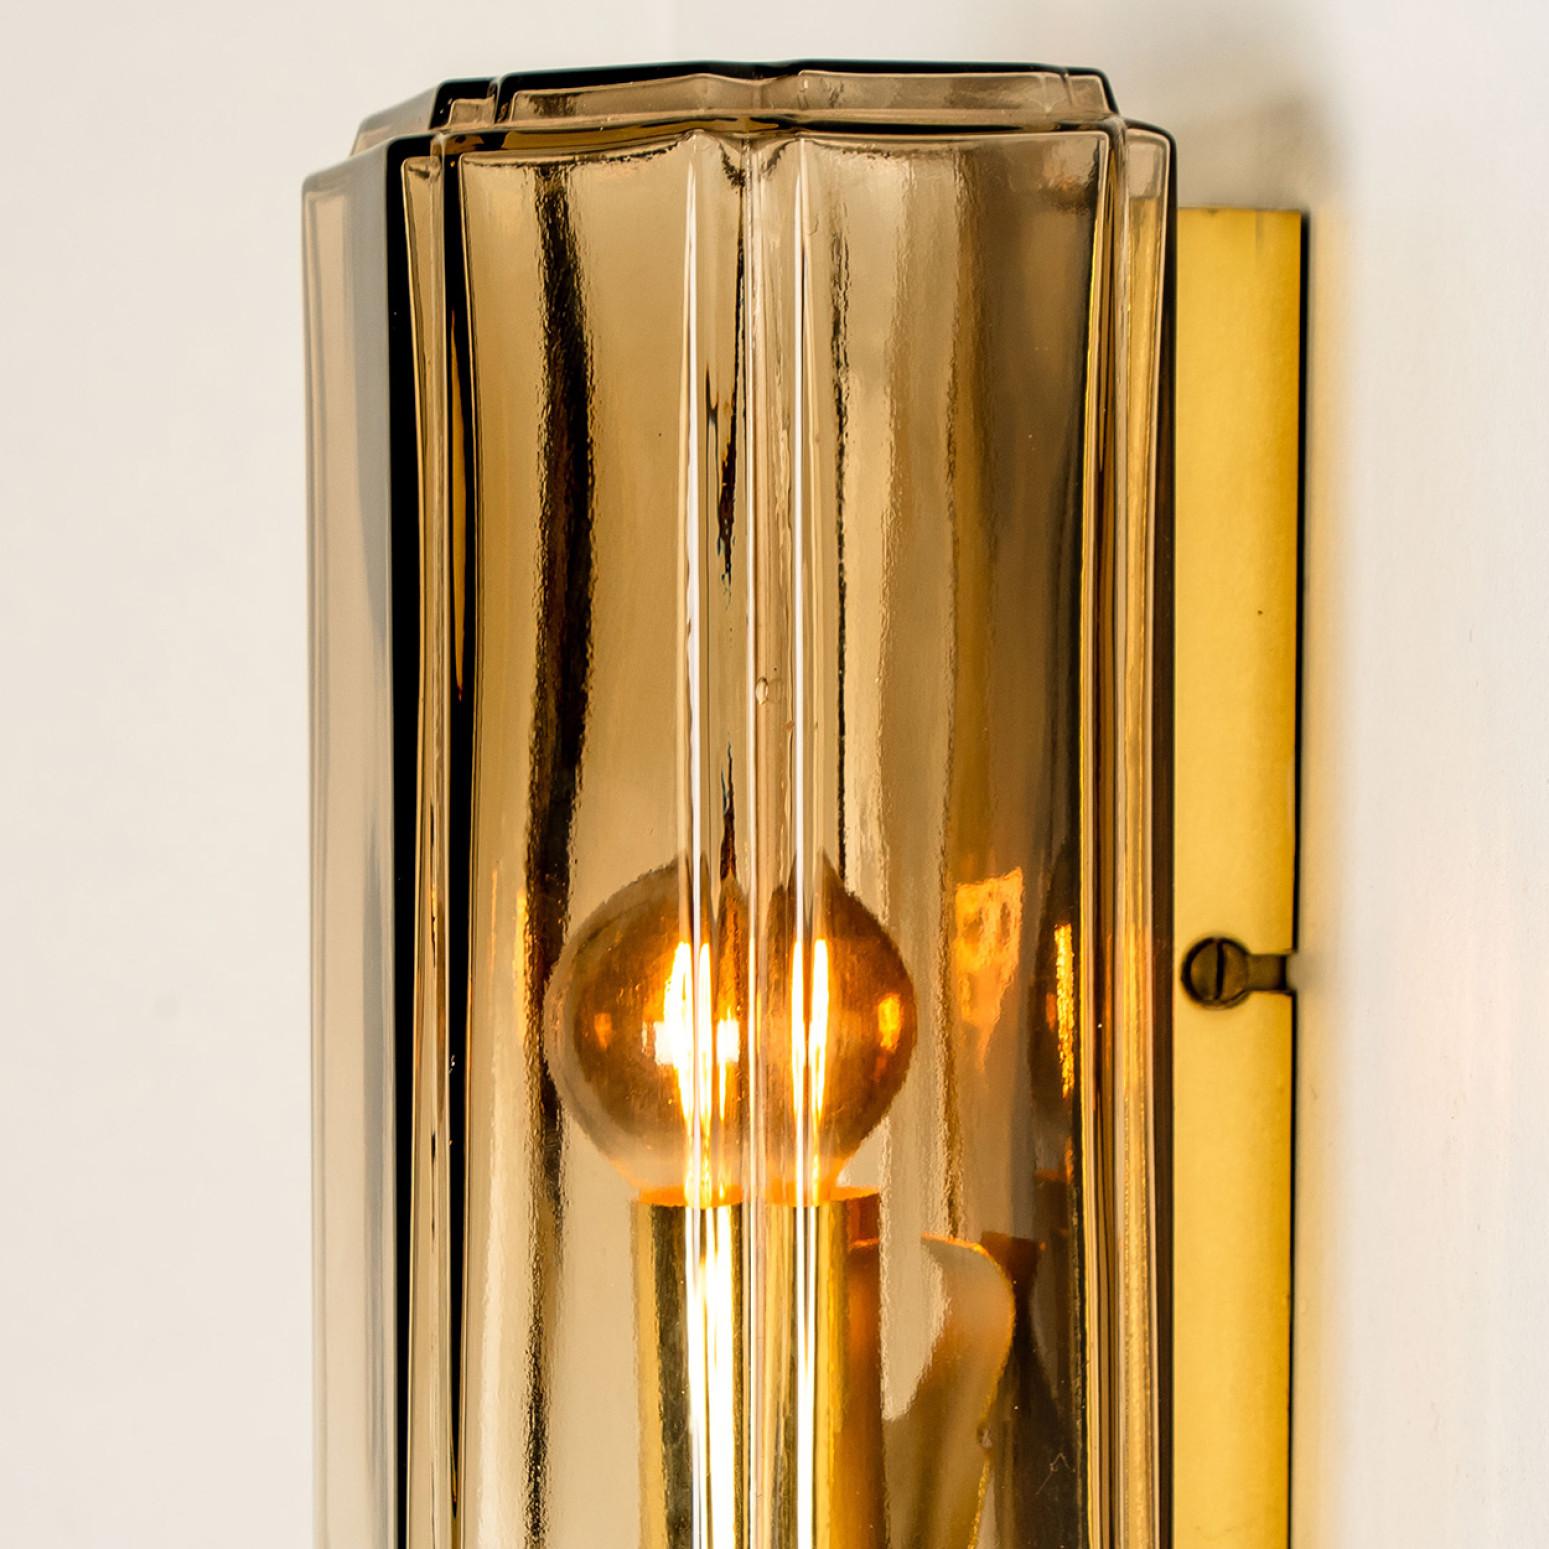 Several Smoked Glass Wall Lights Sconces by Glashütte Limburg, Germany, 1960 For Sale 4